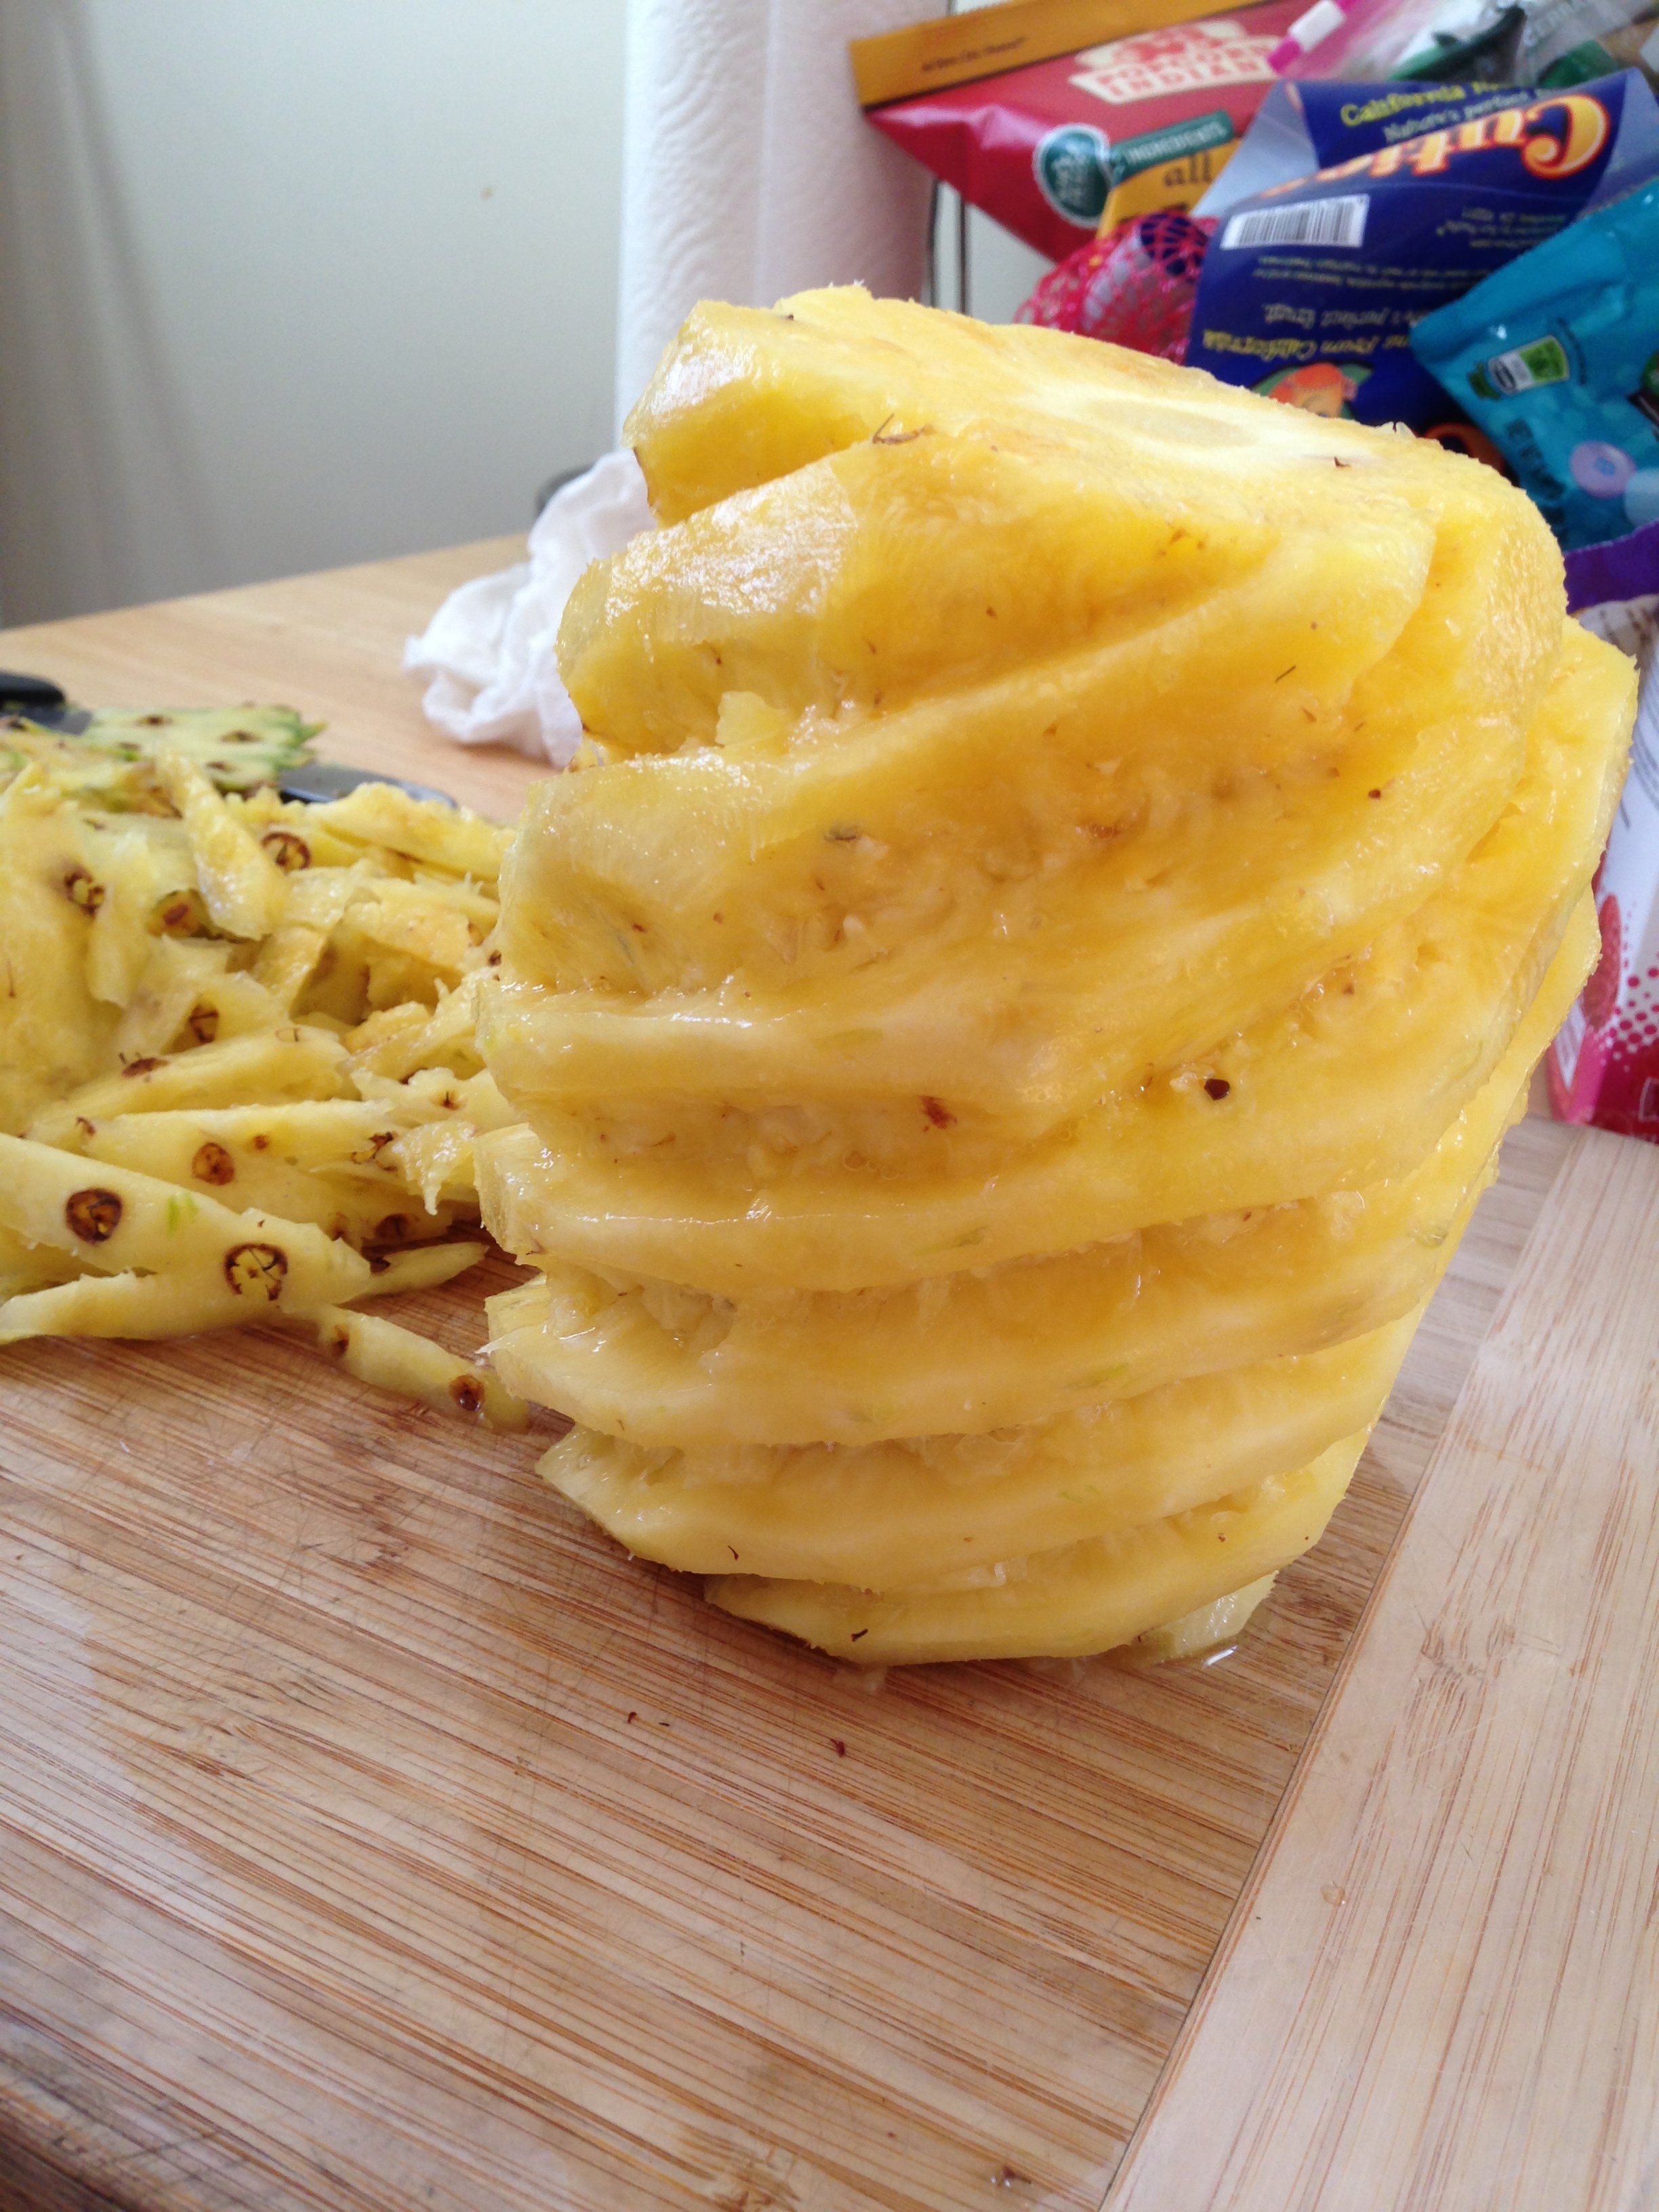 best of Cutting Asian pineapple